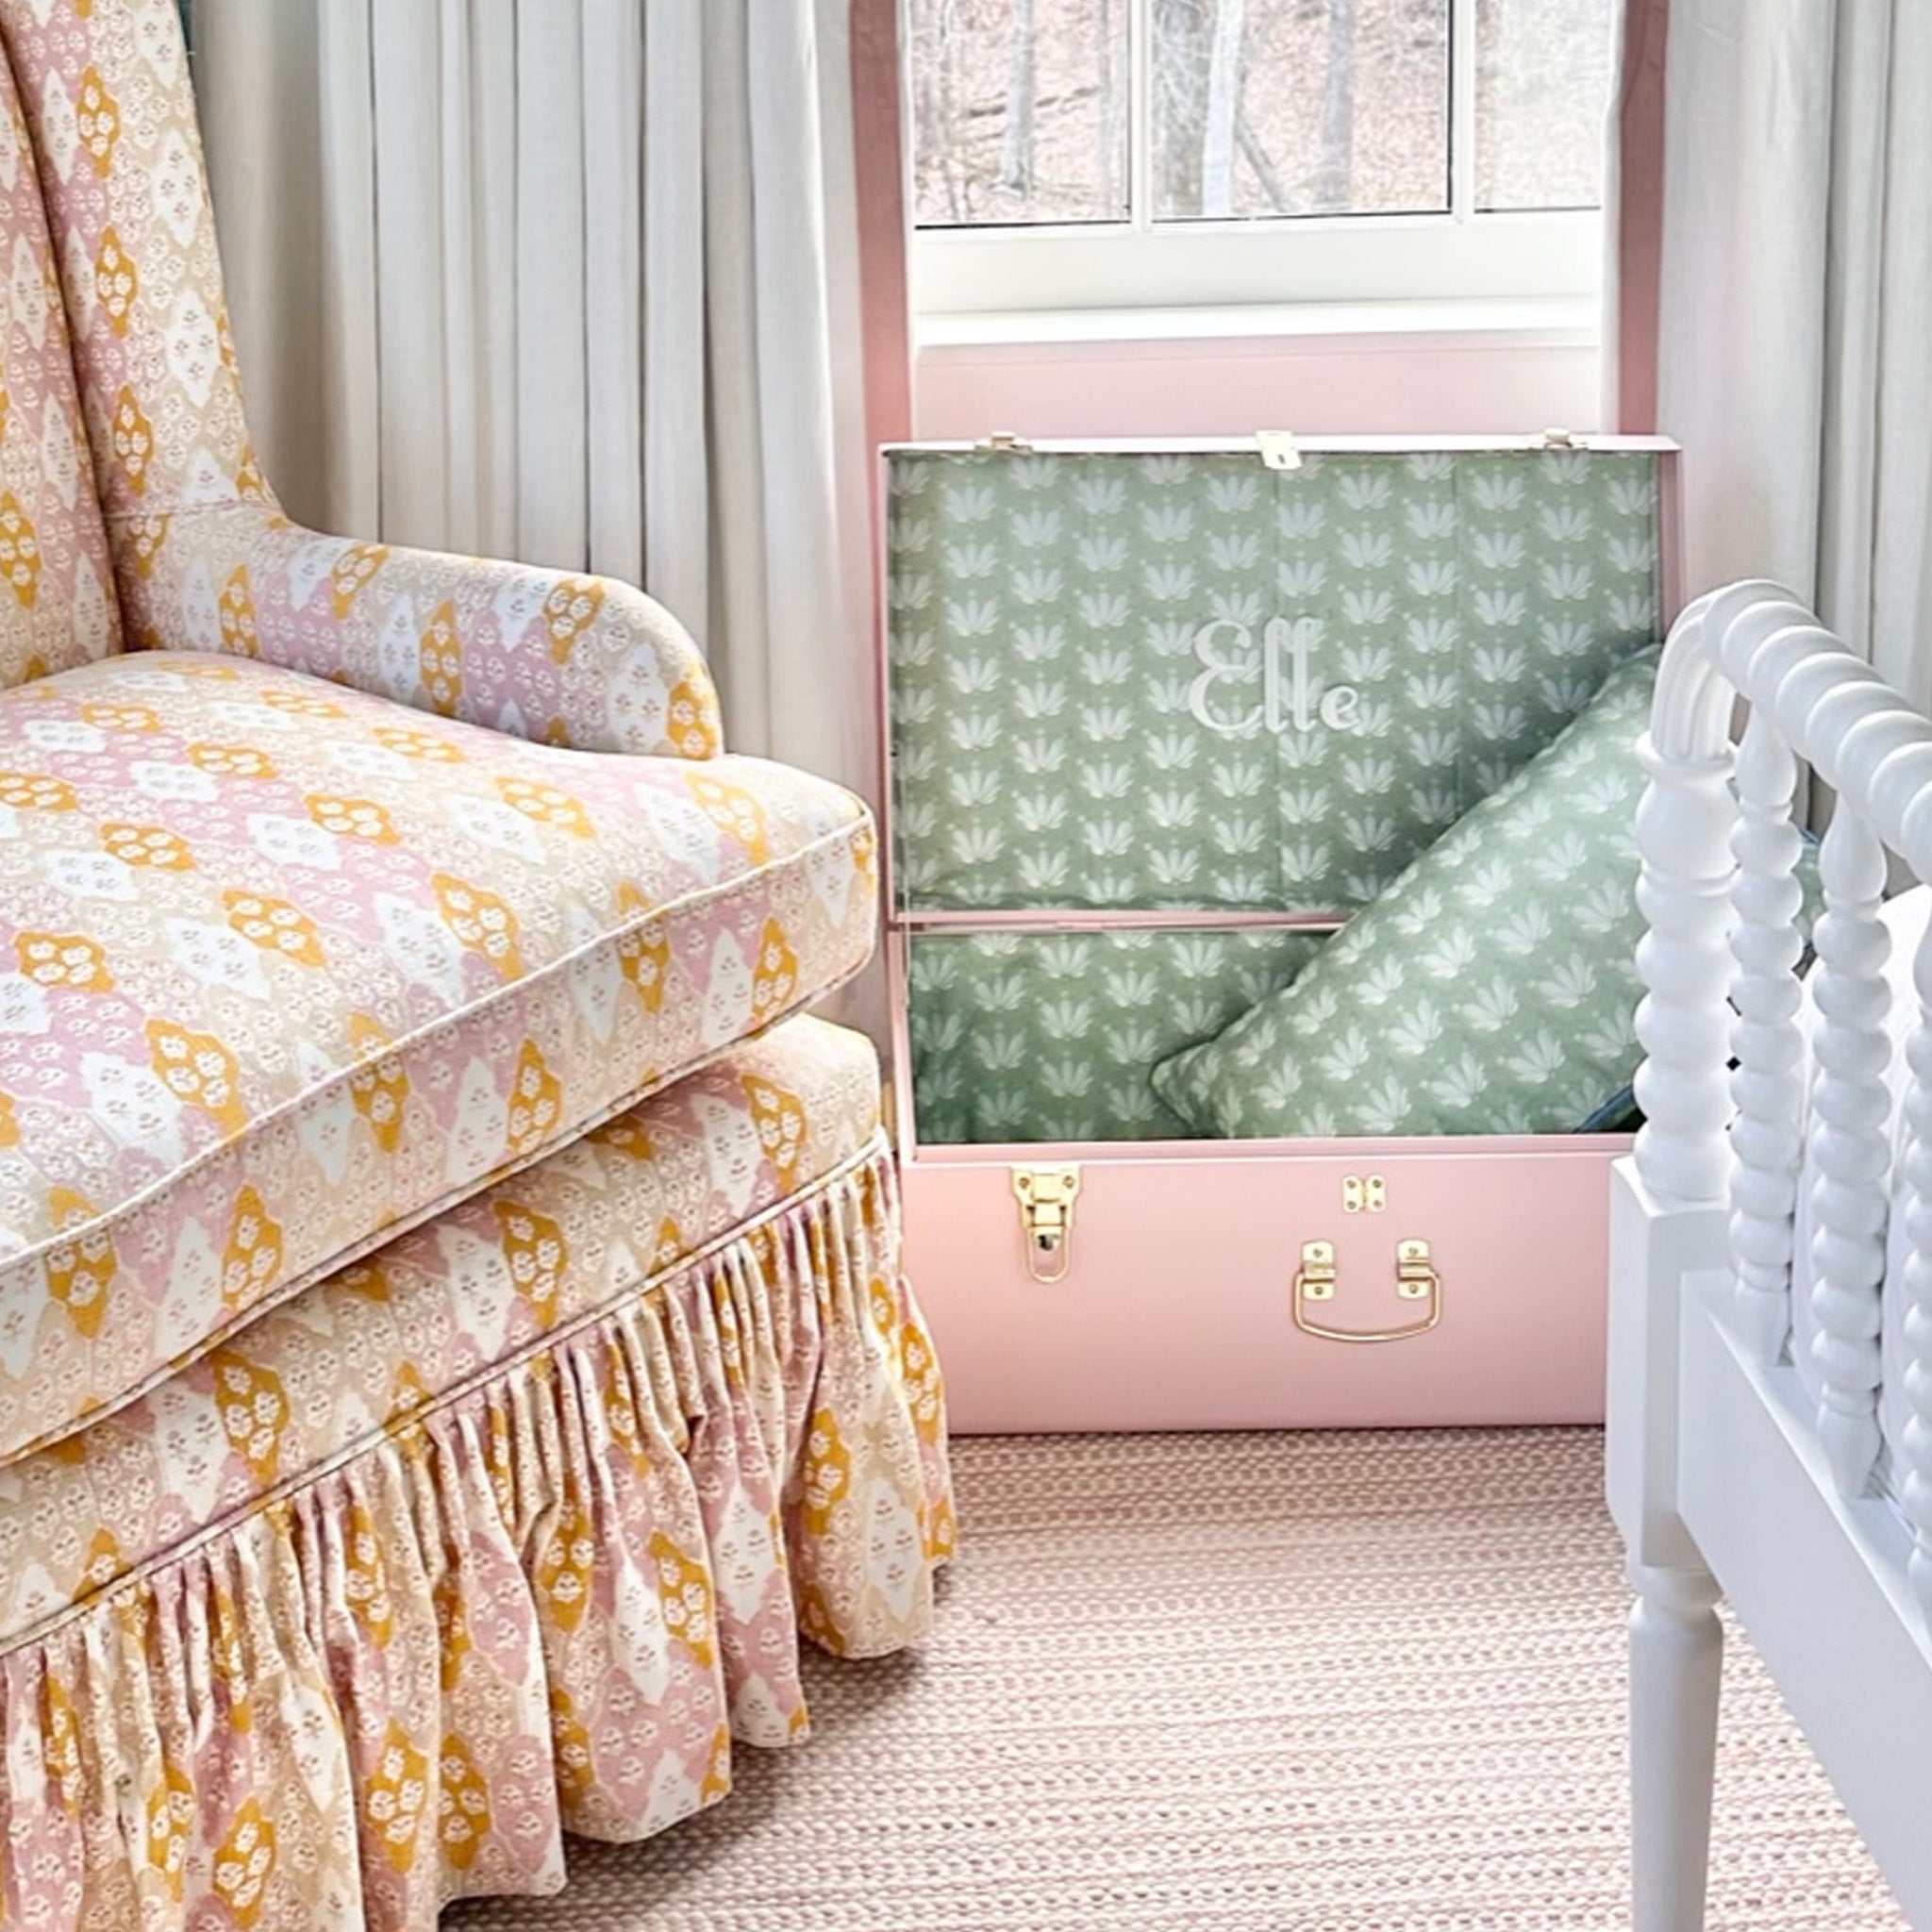 Pink keepsake trunk lined with blue and green floral fabric below a window with white curtains and next to a pink and orange upholstered chair